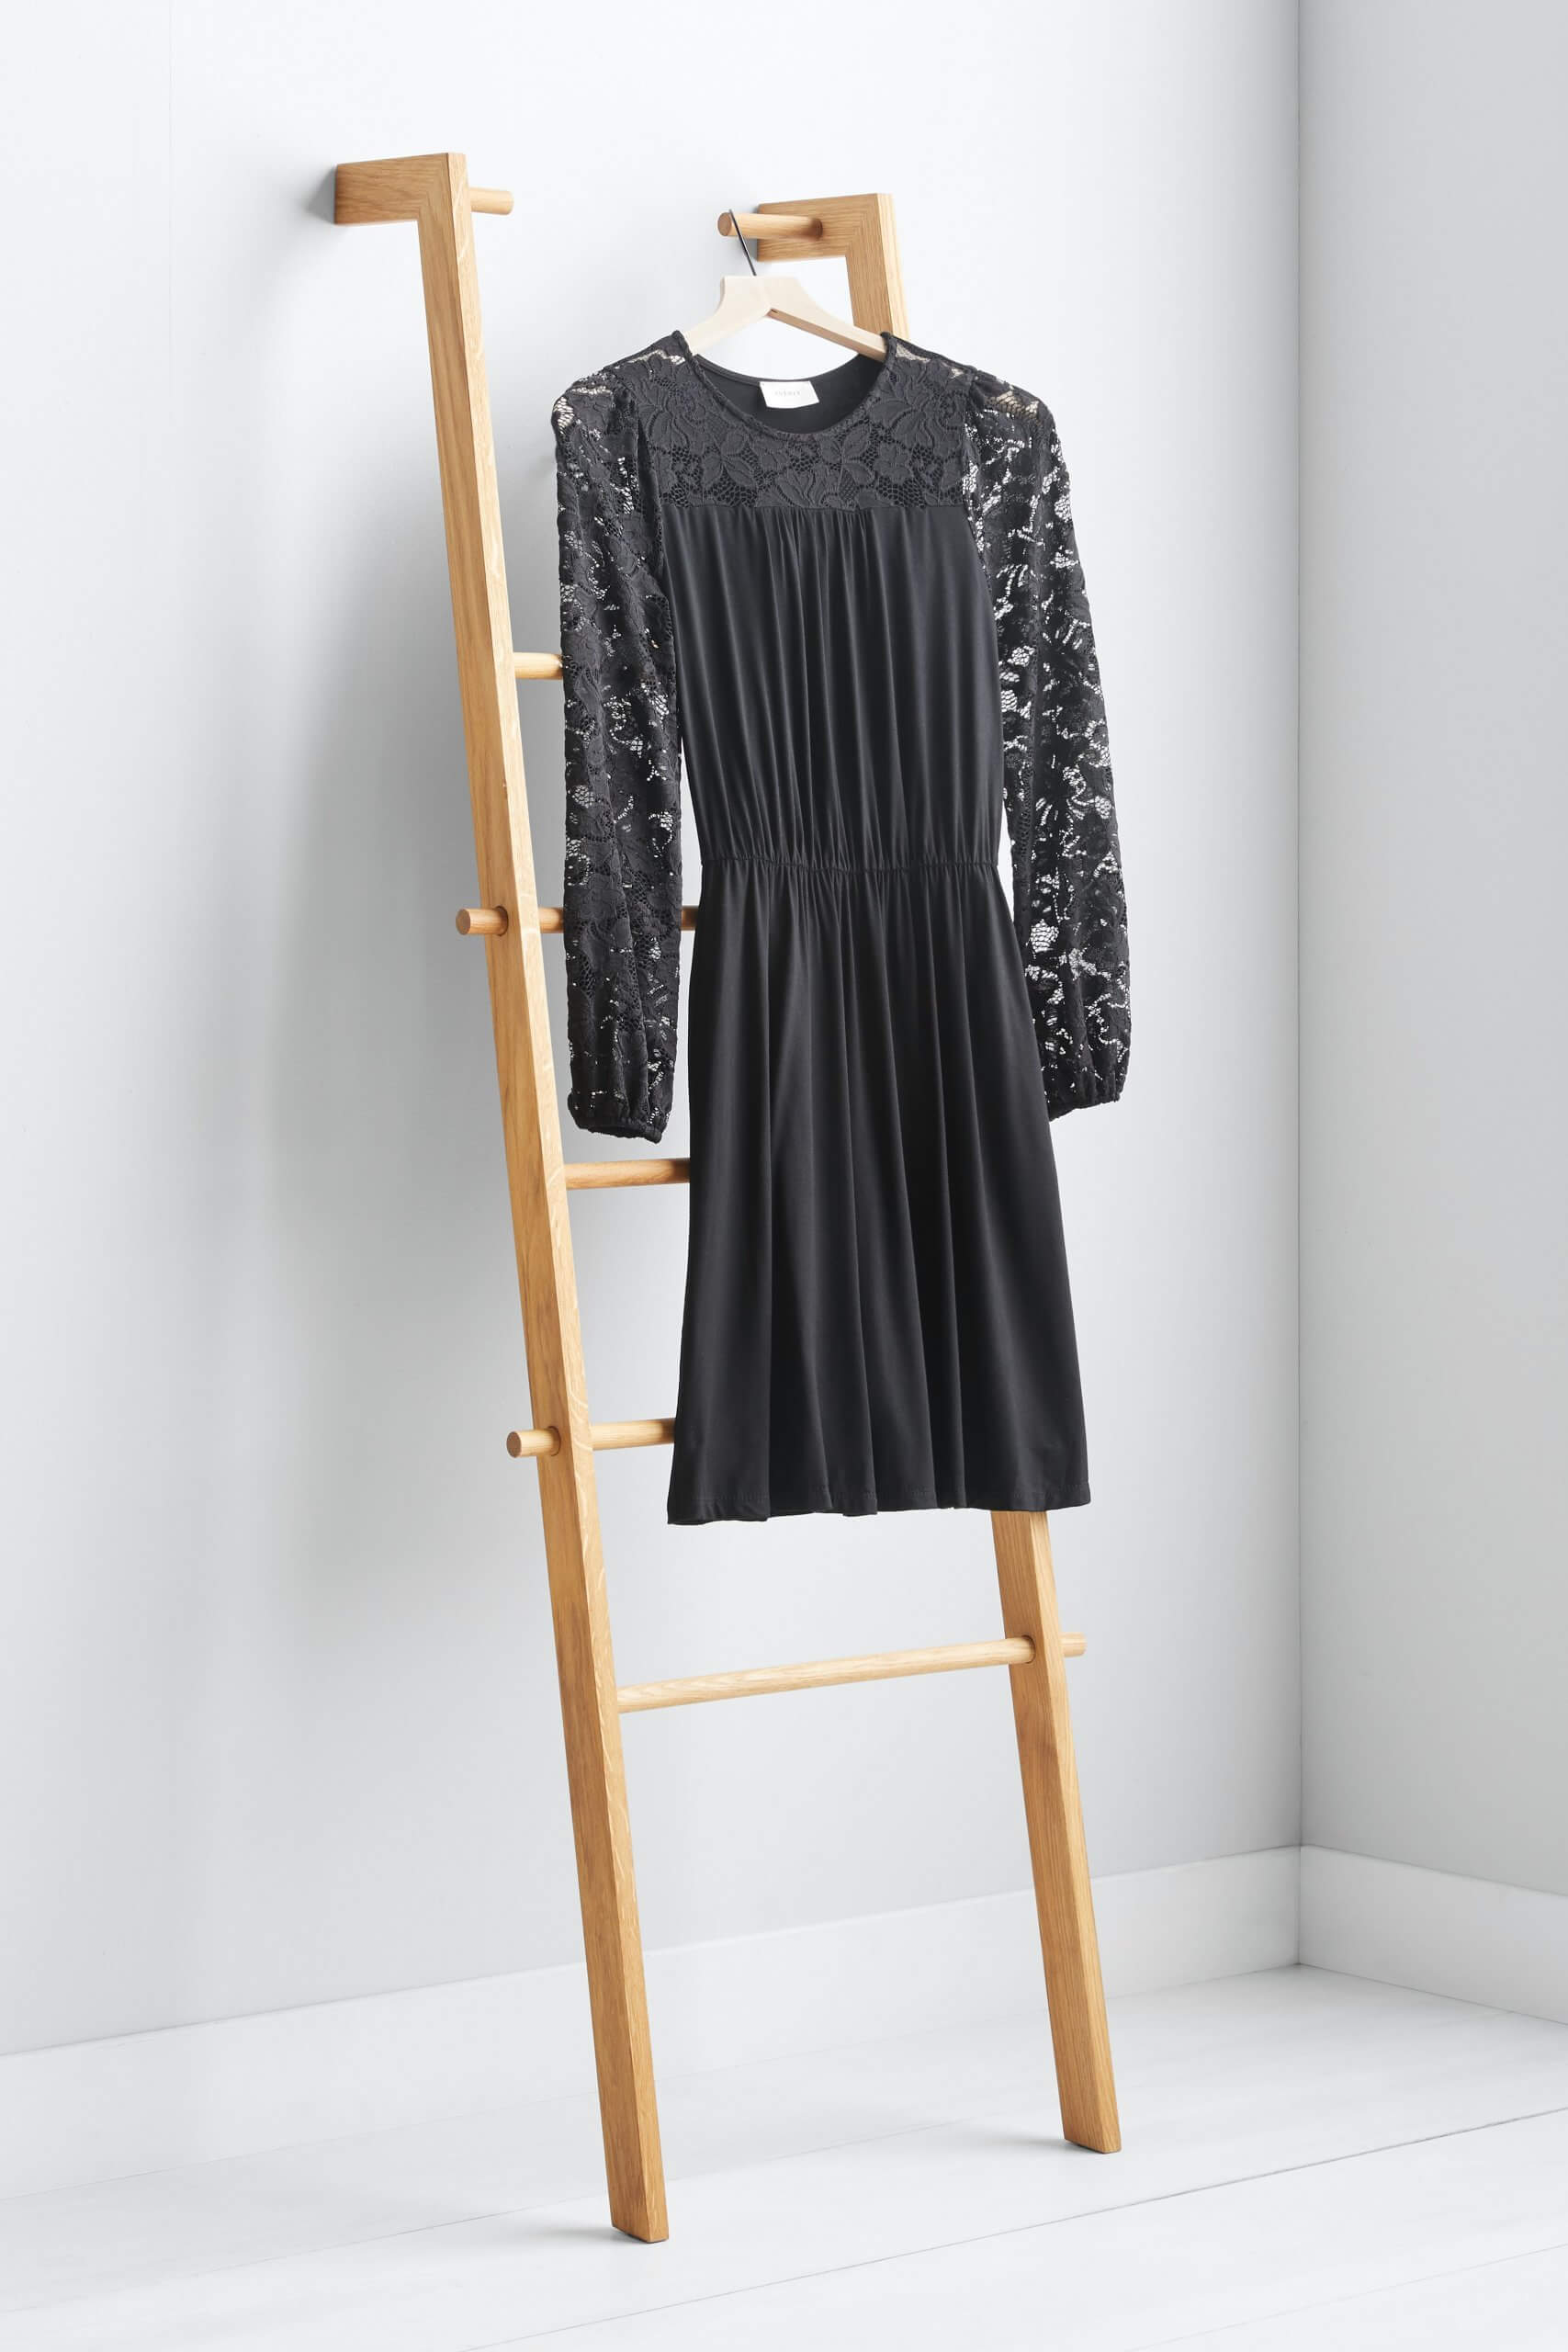 Stitch Fix women’s black dress with lace sleeves hanging on a wooden ladder.